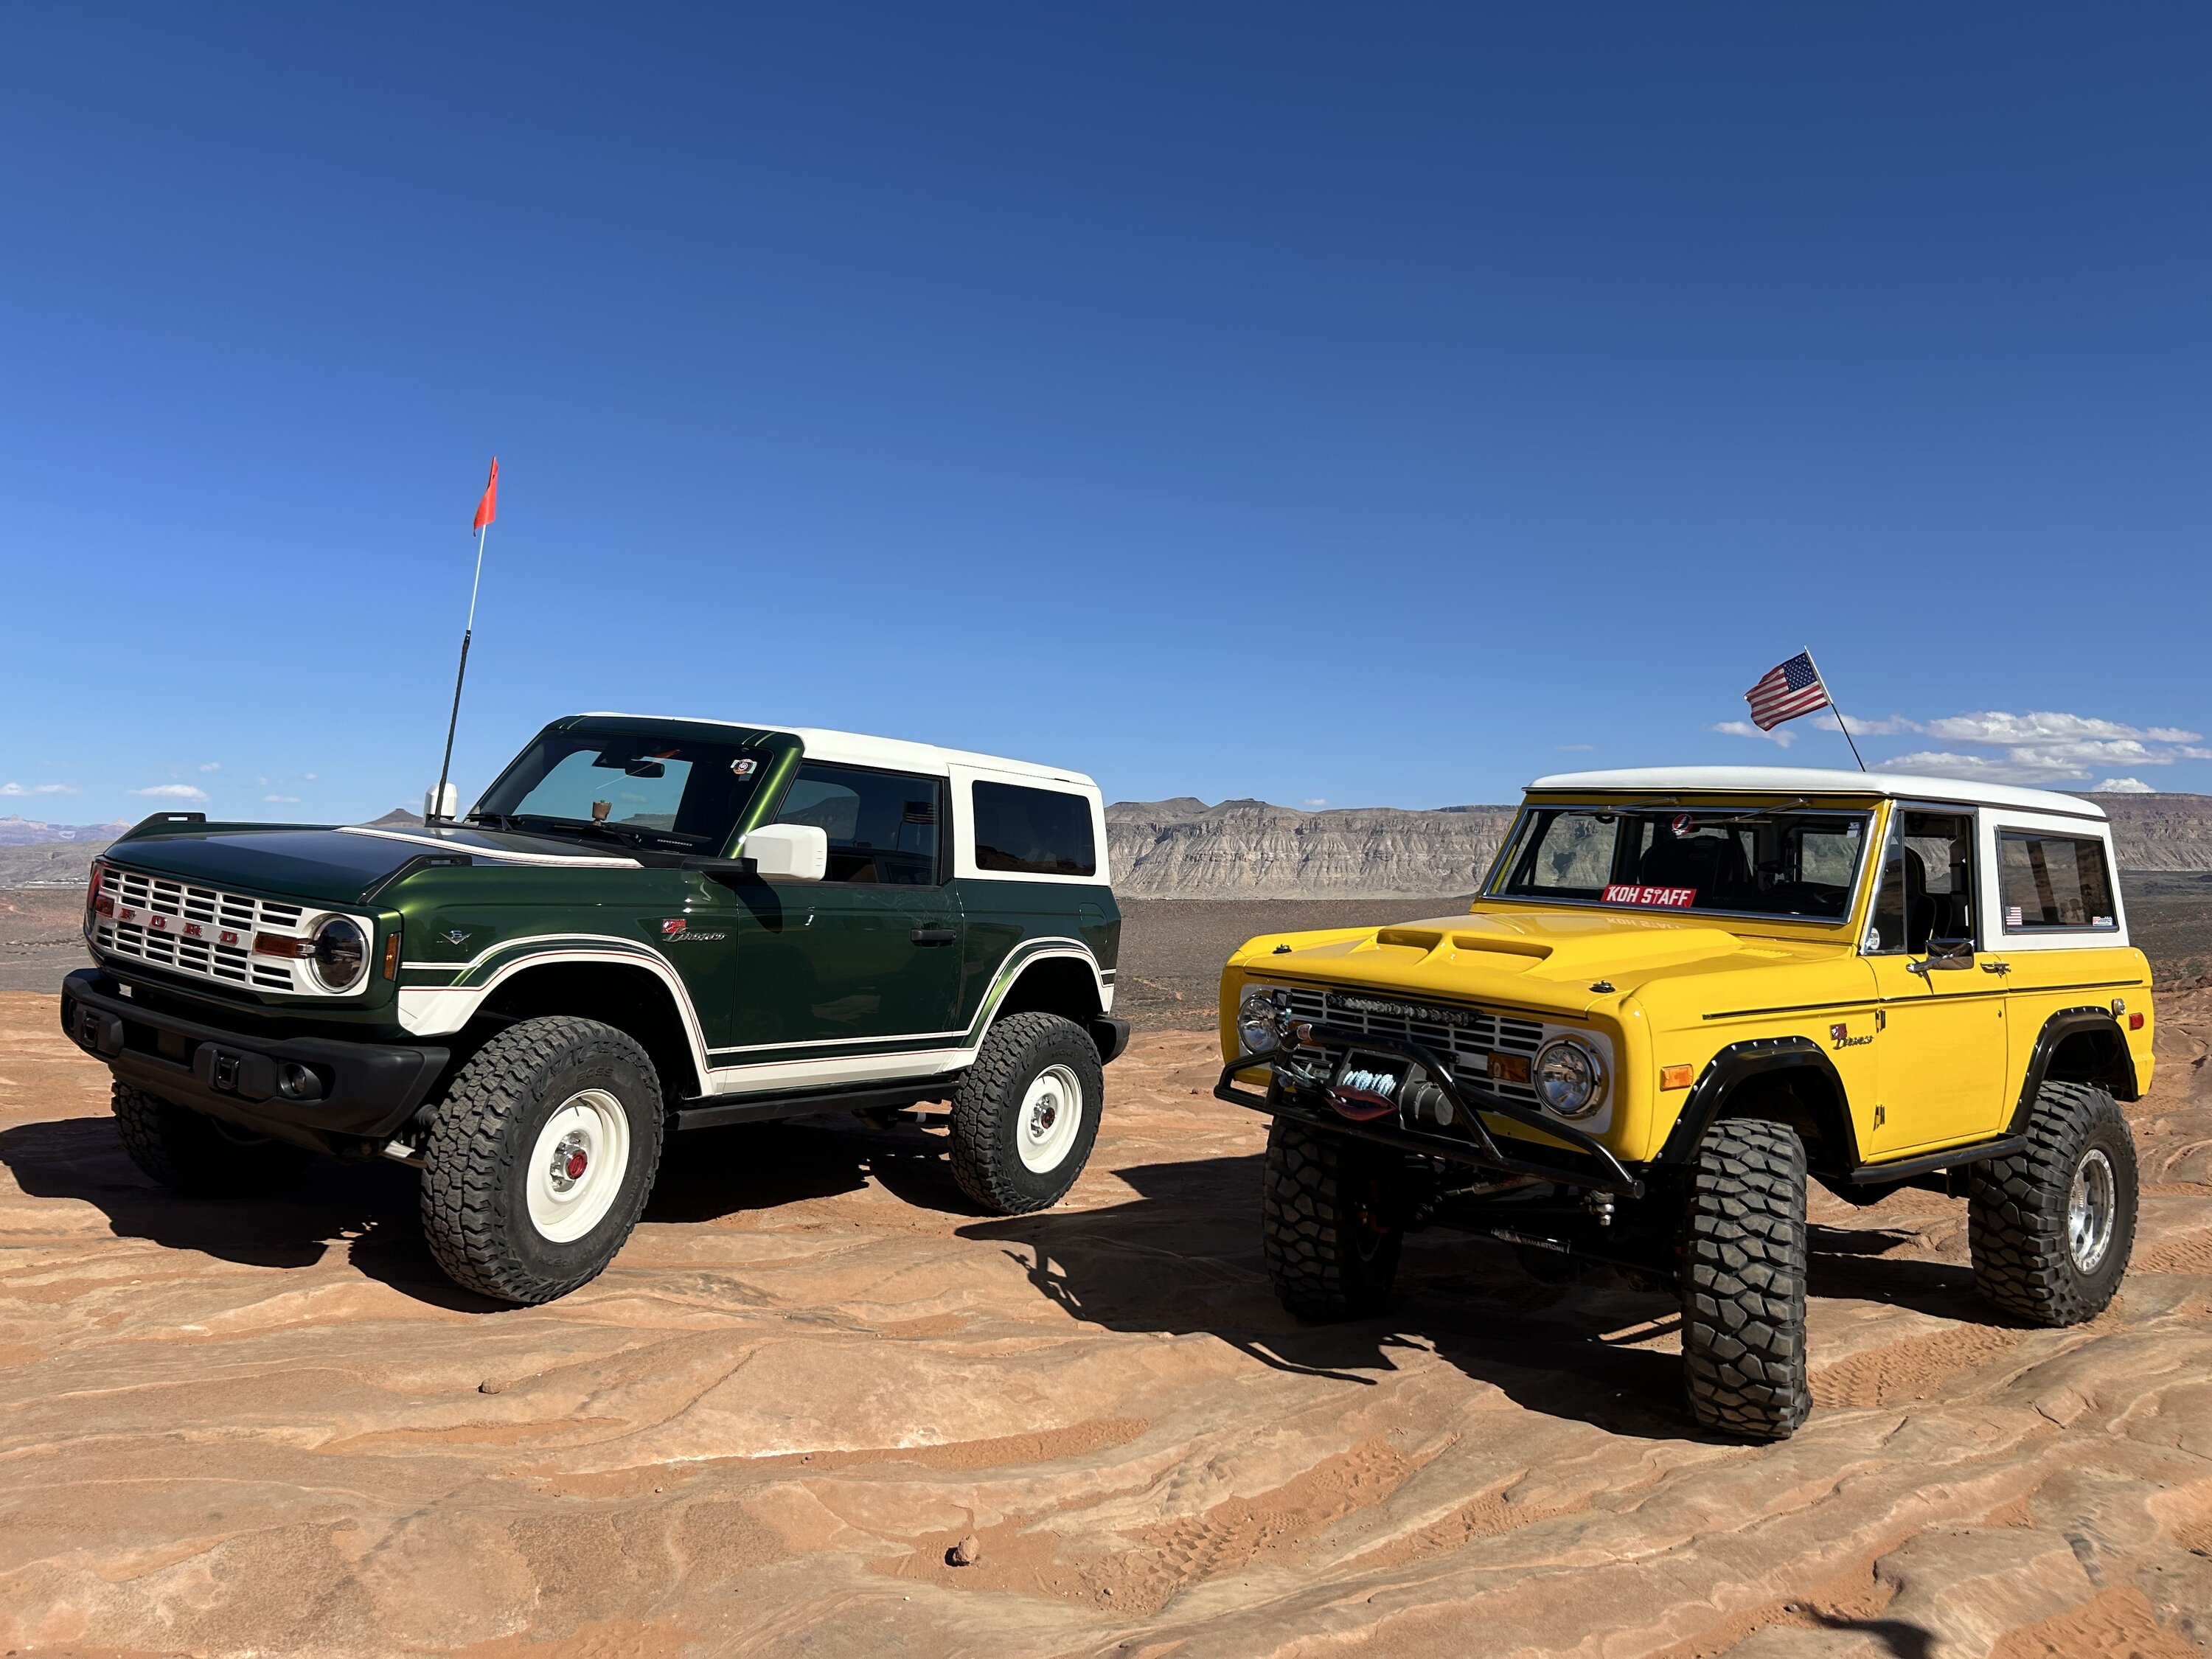 Ford Bronco United by Broncos 2024 event photo dump. Post yours! 📸 IMG_7012